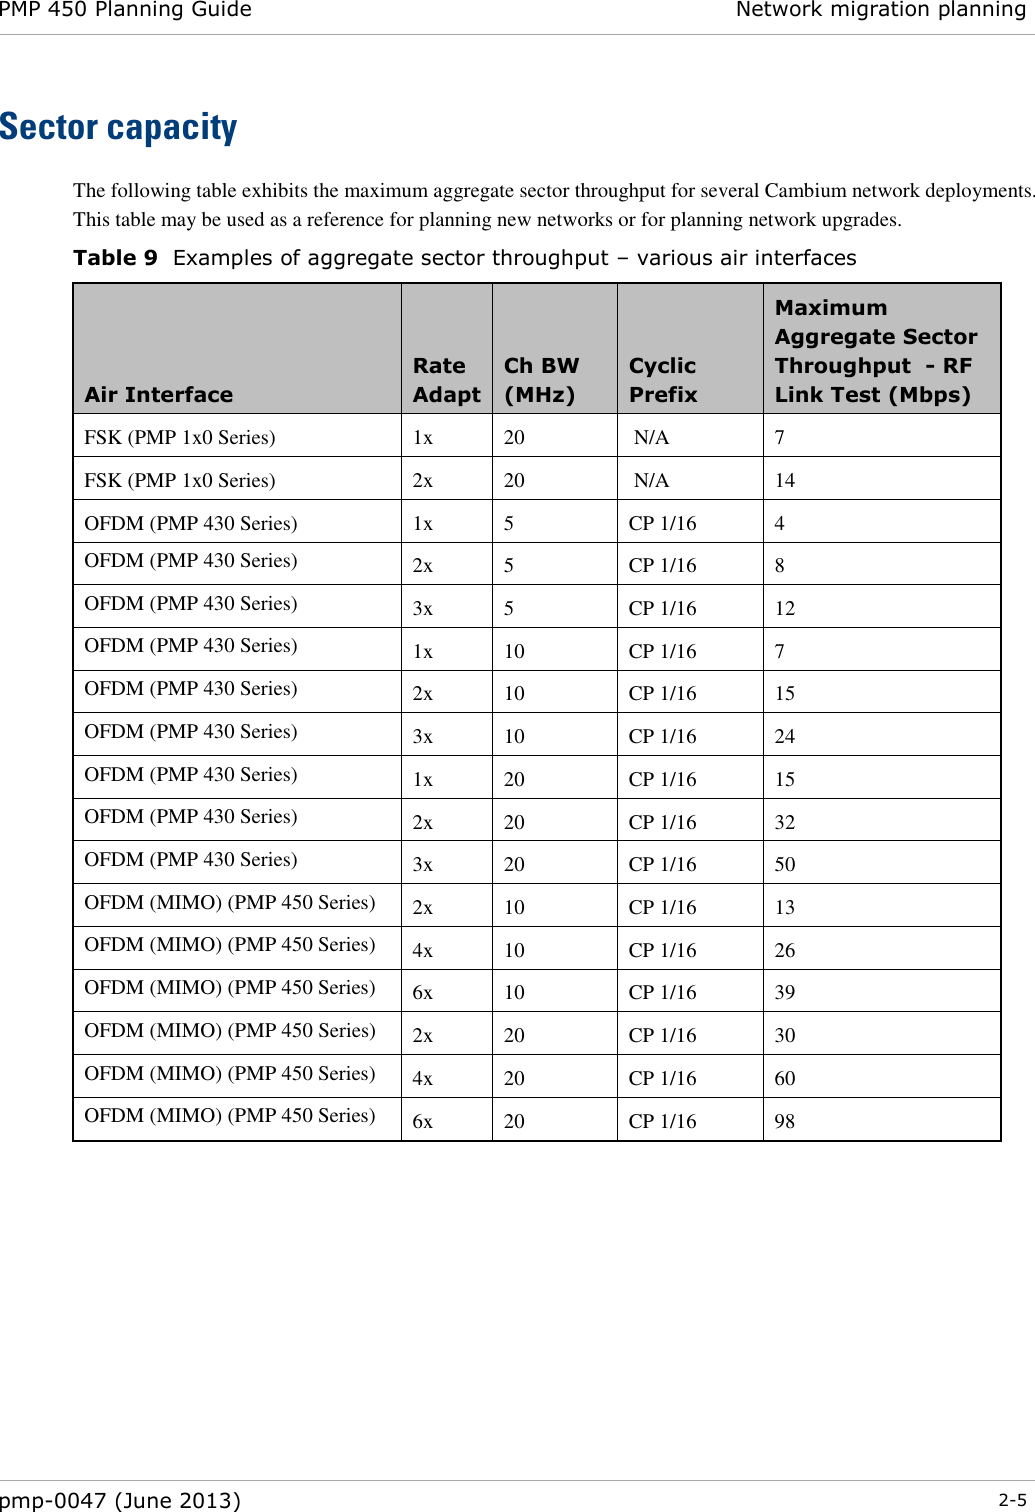 PMP 450 Planning Guide Network migration planning  pmp-0047 (June 2013)  2-5  Sector capacity The following table exhibits the maximum aggregate sector throughput for several Cambium network deployments.  This table may be used as a reference for planning new networks or for planning network upgrades. Table 9  Examples of aggregate sector throughput – various air interfaces Air Interface Rate Adapt Ch BW   (MHz) Cyclic Prefix Maximum Aggregate Sector Throughput  - RF Link Test (Mbps) FSK (PMP 1x0 Series) 1x 20  N/A 7 FSK (PMP 1x0 Series) 2x 20  N/A 14 OFDM (PMP 430 Series) 1x 5 CP 1/16 4 OFDM (PMP 430 Series) 2x 5 CP 1/16 8 OFDM (PMP 430 Series) 3x 5 CP 1/16 12 OFDM (PMP 430 Series) 1x 10 CP 1/16 7 OFDM (PMP 430 Series) 2x 10 CP 1/16 15 OFDM (PMP 430 Series) 3x 10 CP 1/16 24 OFDM (PMP 430 Series) 1x 20 CP 1/16 15 OFDM (PMP 430 Series) 2x 20 CP 1/16 32 OFDM (PMP 430 Series) 3x 20 CP 1/16 50 OFDM (MIMO) (PMP 450 Series) 2x 10 CP 1/16 13 OFDM (MIMO) (PMP 450 Series) 4x 10 CP 1/16 26 OFDM (MIMO) (PMP 450 Series) 6x 10 CP 1/16 39 OFDM (MIMO) (PMP 450 Series) 2x 20 CP 1/16 30 OFDM (MIMO) (PMP 450 Series) 4x 20 CP 1/16 60 OFDM (MIMO) (PMP 450 Series) 6x 20 CP 1/16 98   